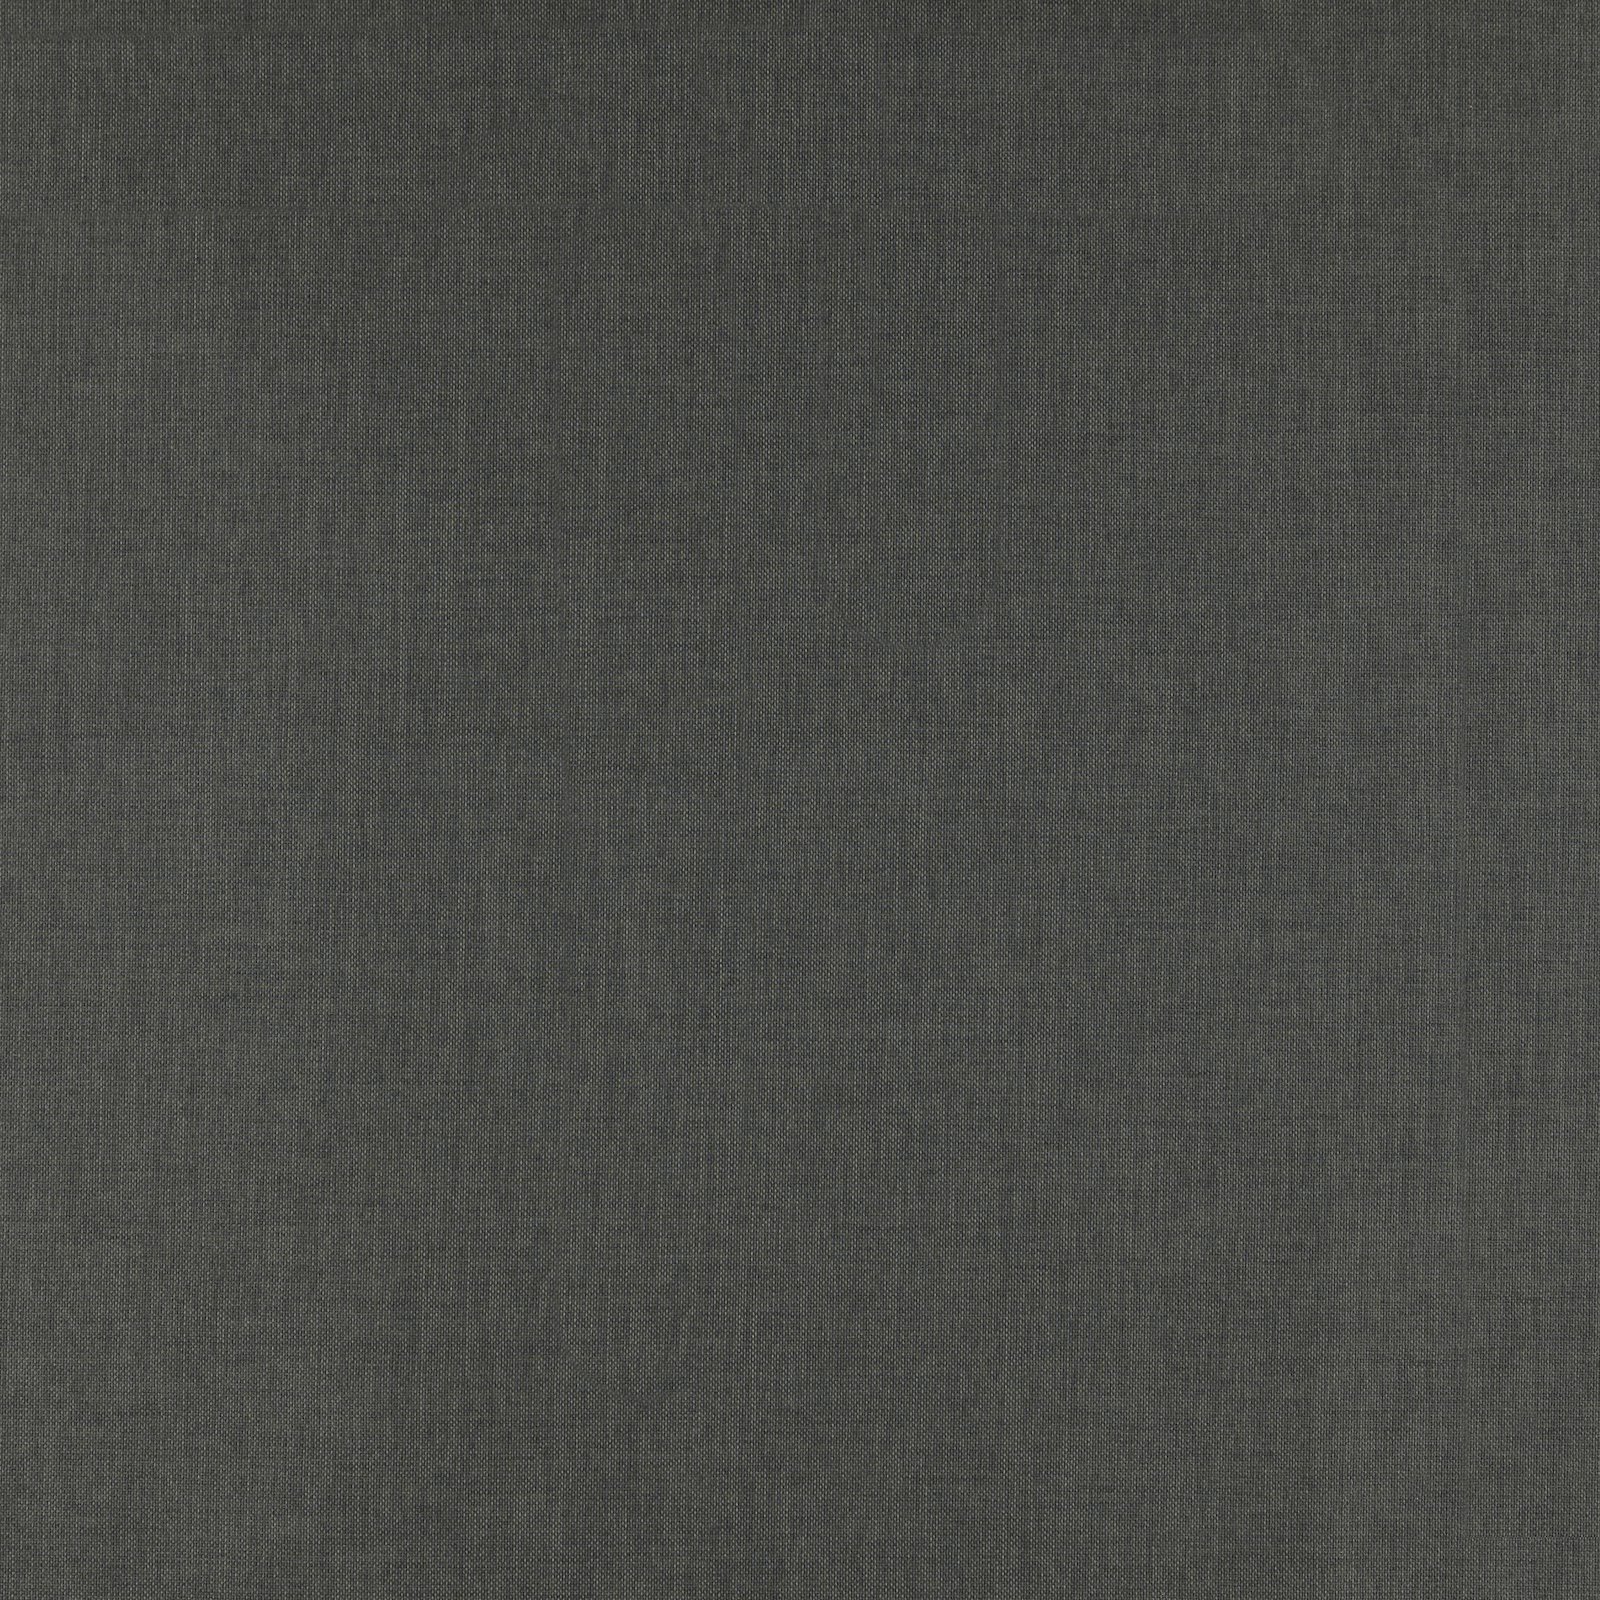 Upholstery fabric medium grey 822183_pack_solid